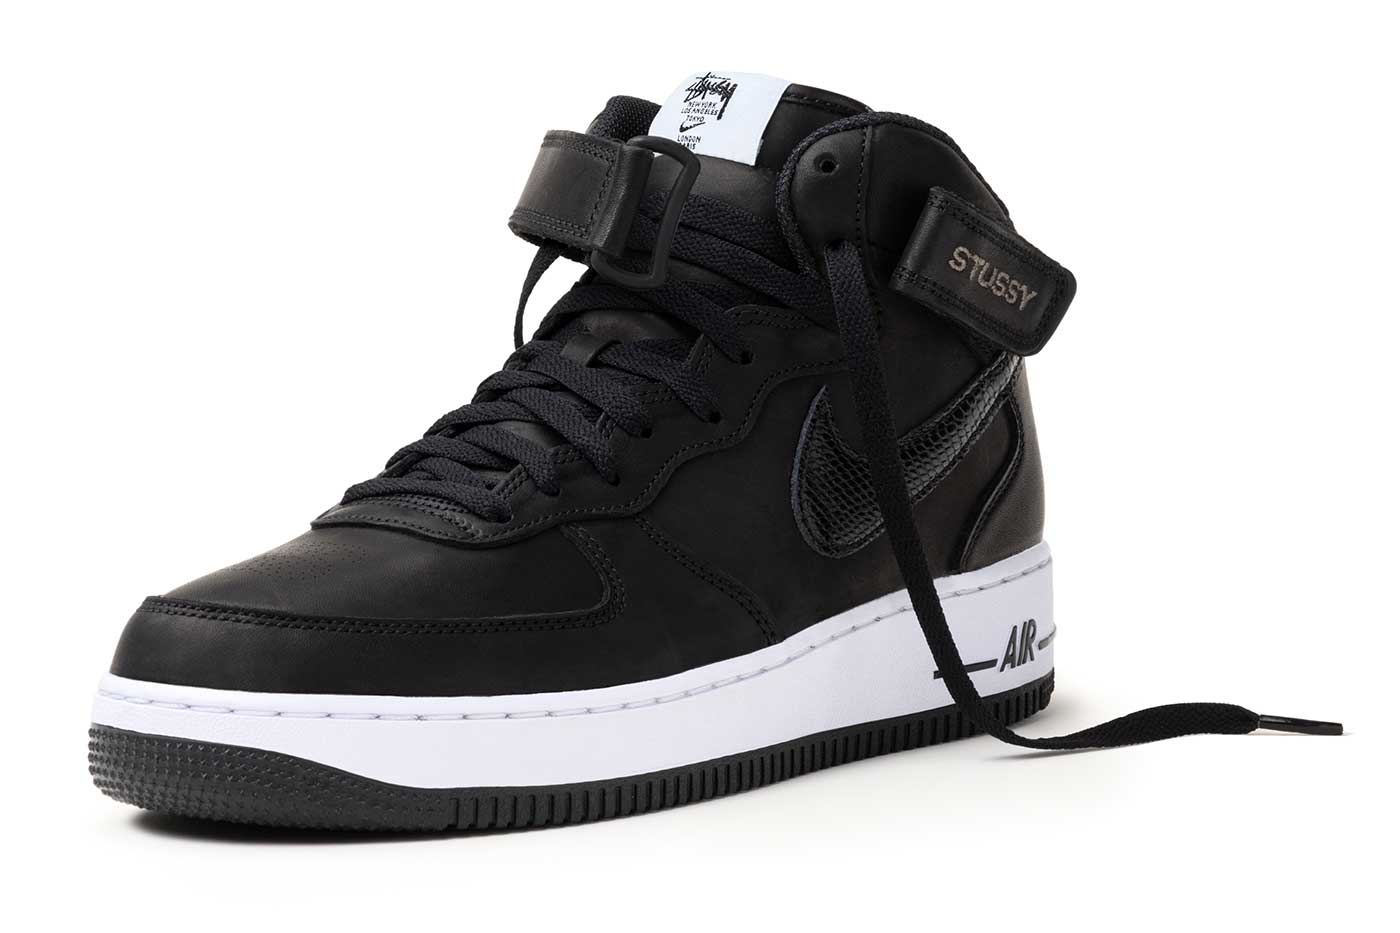 stussy-nike-air-force-1-mid-sneaker-price-release-date-price (3)